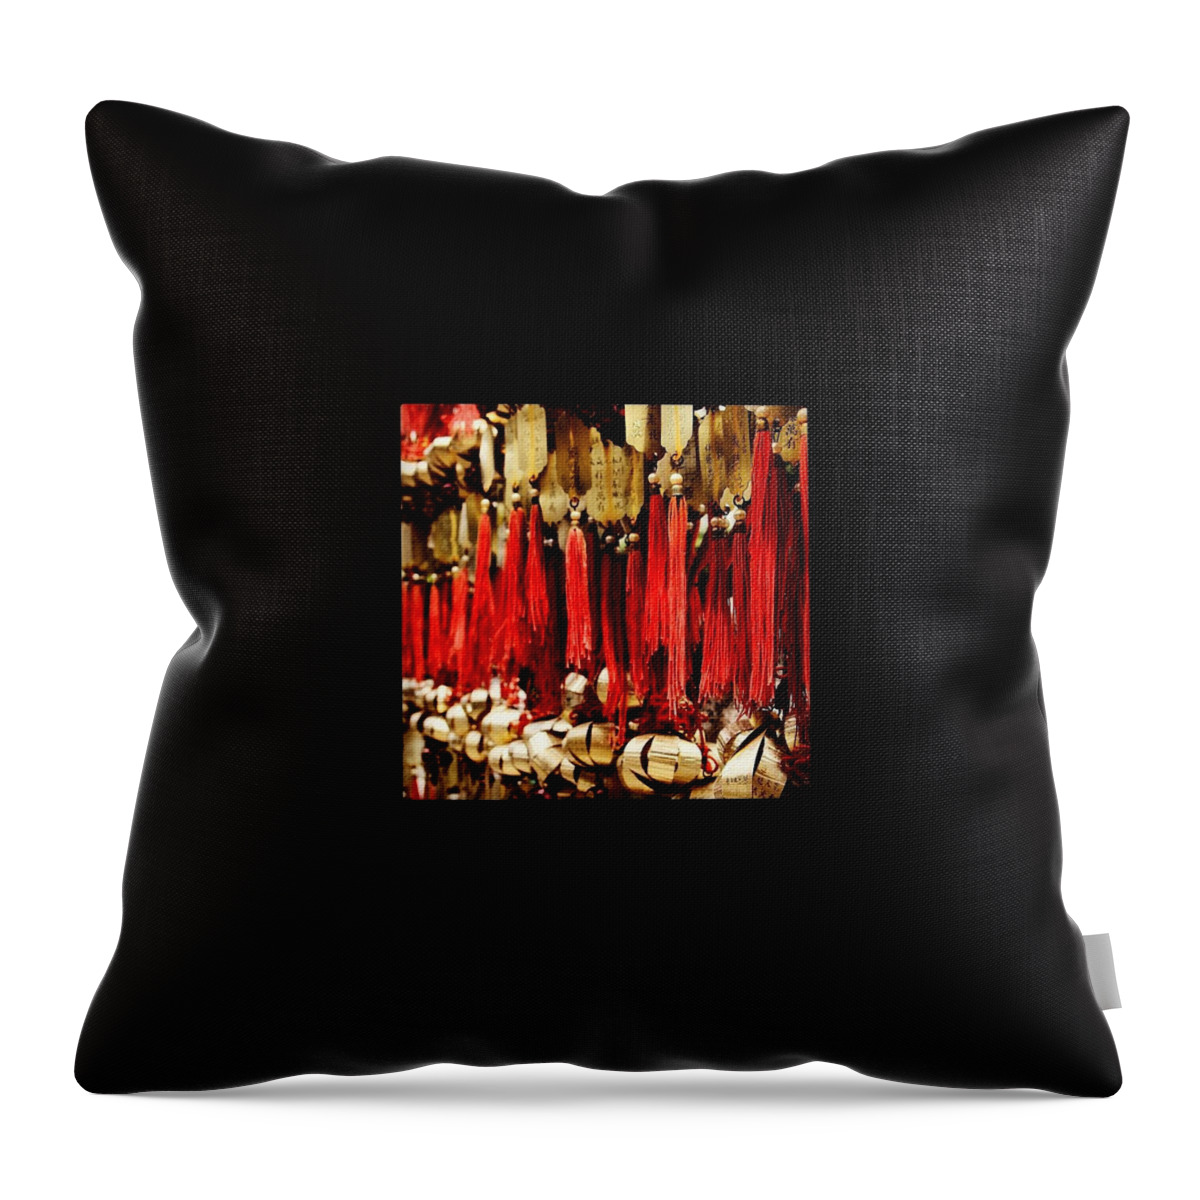  Throw Pillow featuring the photograph Will Figure Out Why These Are Hanging by Lorelle Phoenix